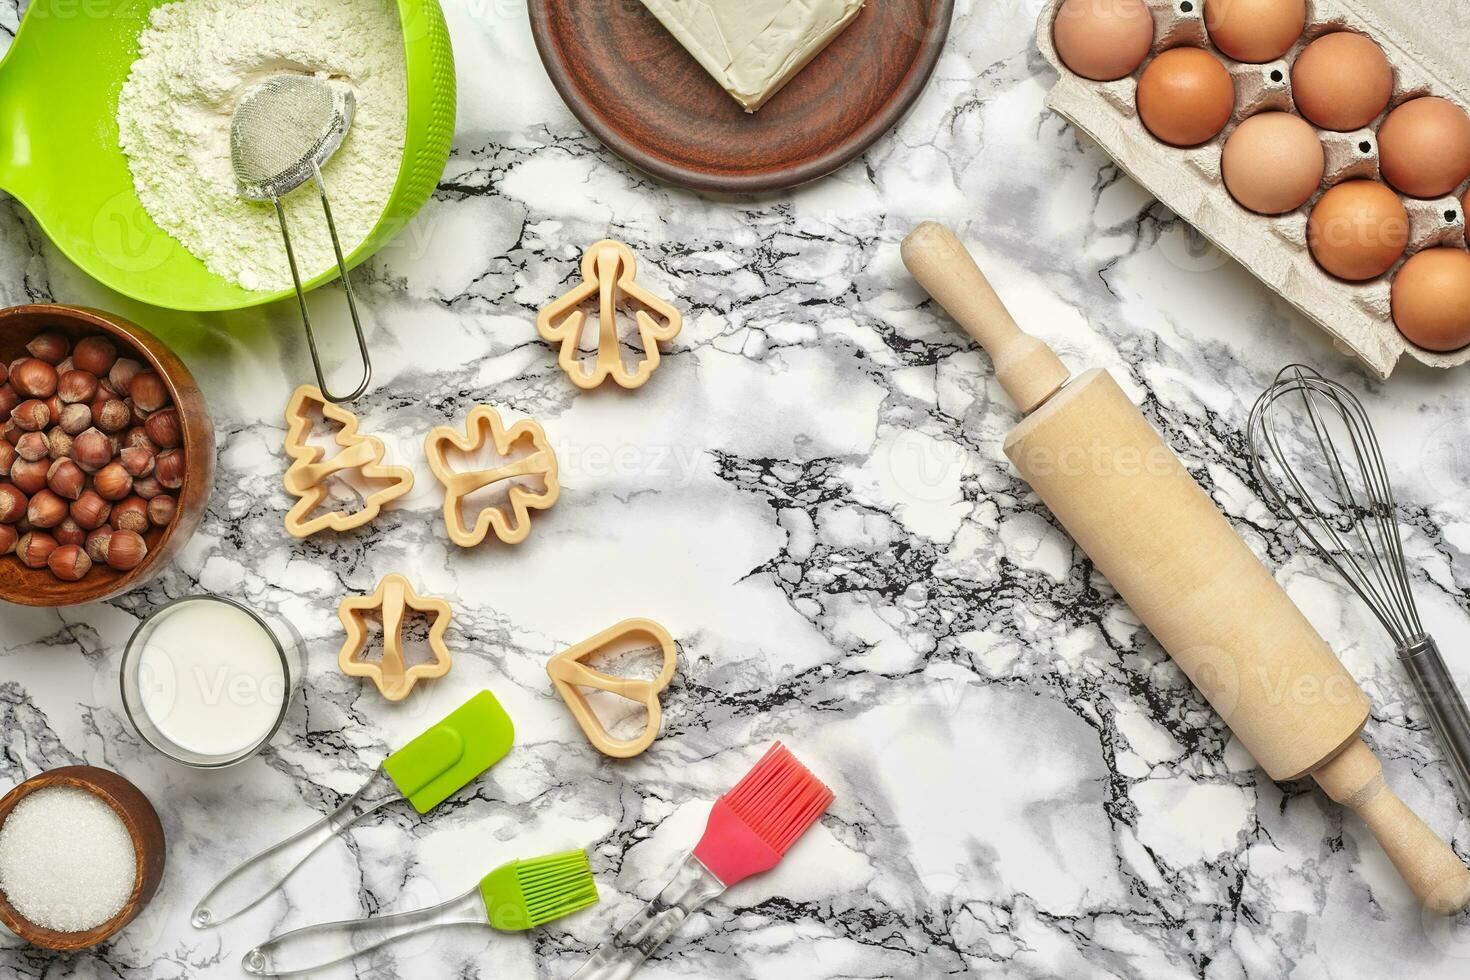 Close-up shot. Top view of a baking ingredients and kitchenware on the marble table background. photo